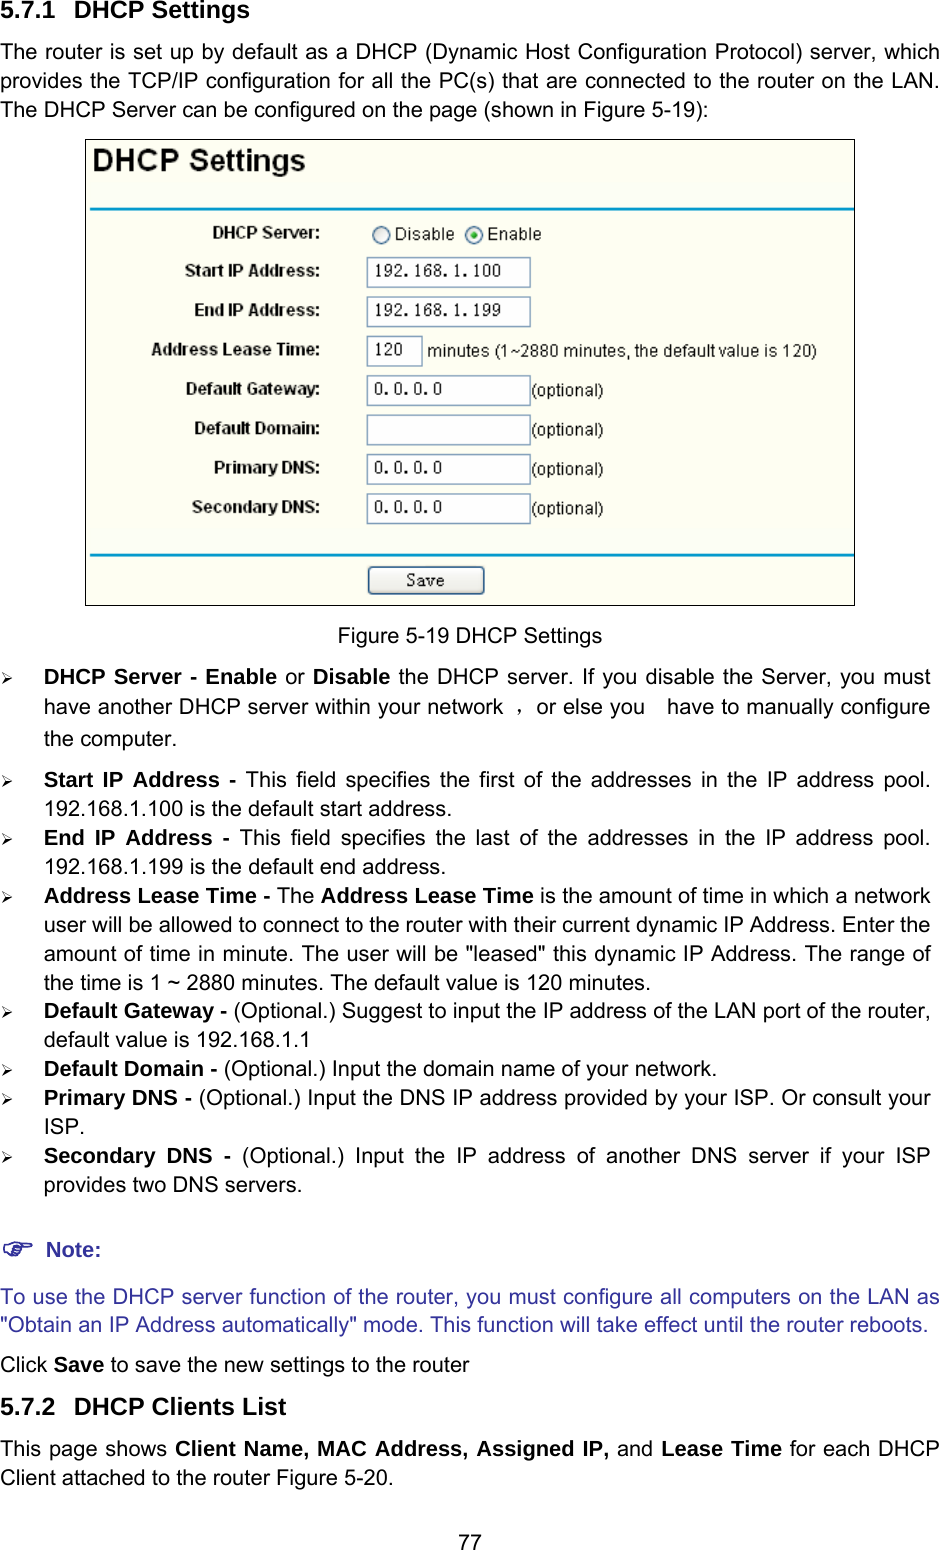  77 5.7.1  DHCP Settings The router is set up by default as a DHCP (Dynamic Host Configuration Protocol) server, which provides the TCP/IP configuration for all the PC(s) that are connected to the router on the LAN. The DHCP Server can be configured on the page (shown in Figure 5-19):  Figure 5-19 DHCP Settings ¾ DHCP Server - Enable or Disable the DHCP server. If you disable the Server, you must have another DHCP server within your network  ，or else you    have to manually configure the computer. ¾ Start IP Address - This field specifies the first of the addresses in the IP address pool. 192.168.1.100 is the default start address. ¾ End IP Address - This field specifies the last of the addresses in the IP address pool. 192.168.1.199 is the default end address. ¾ Address Lease Time - The Address Lease Time is the amount of time in which a network user will be allowed to connect to the router with their current dynamic IP Address. Enter the amount of time in minute. The user will be &quot;leased&quot; this dynamic IP Address. The range of the time is 1 ~ 2880 minutes. The default value is 120 minutes. ¾ Default Gateway - (Optional.) Suggest to input the IP address of the LAN port of the router, default value is 192.168.1.1 ¾ Default Domain - (Optional.) Input the domain name of your network. ¾ Primary DNS - (Optional.) Input the DNS IP address provided by your ISP. Or consult your ISP. ¾ Secondary DNS - (Optional.) Input the IP address of another DNS server if your ISP provides two DNS servers. ) Note: To use the DHCP server function of the router, you must configure all computers on the LAN as &quot;Obtain an IP Address automatically&quot; mode. This function will take effect until the router reboots. Click Save to save the new settings to the router 5.7.2  DHCP Clients List This page shows Client Name, MAC Address, Assigned IP, and Lease Time for each DHCP Client attached to the router Figure 5-20. 